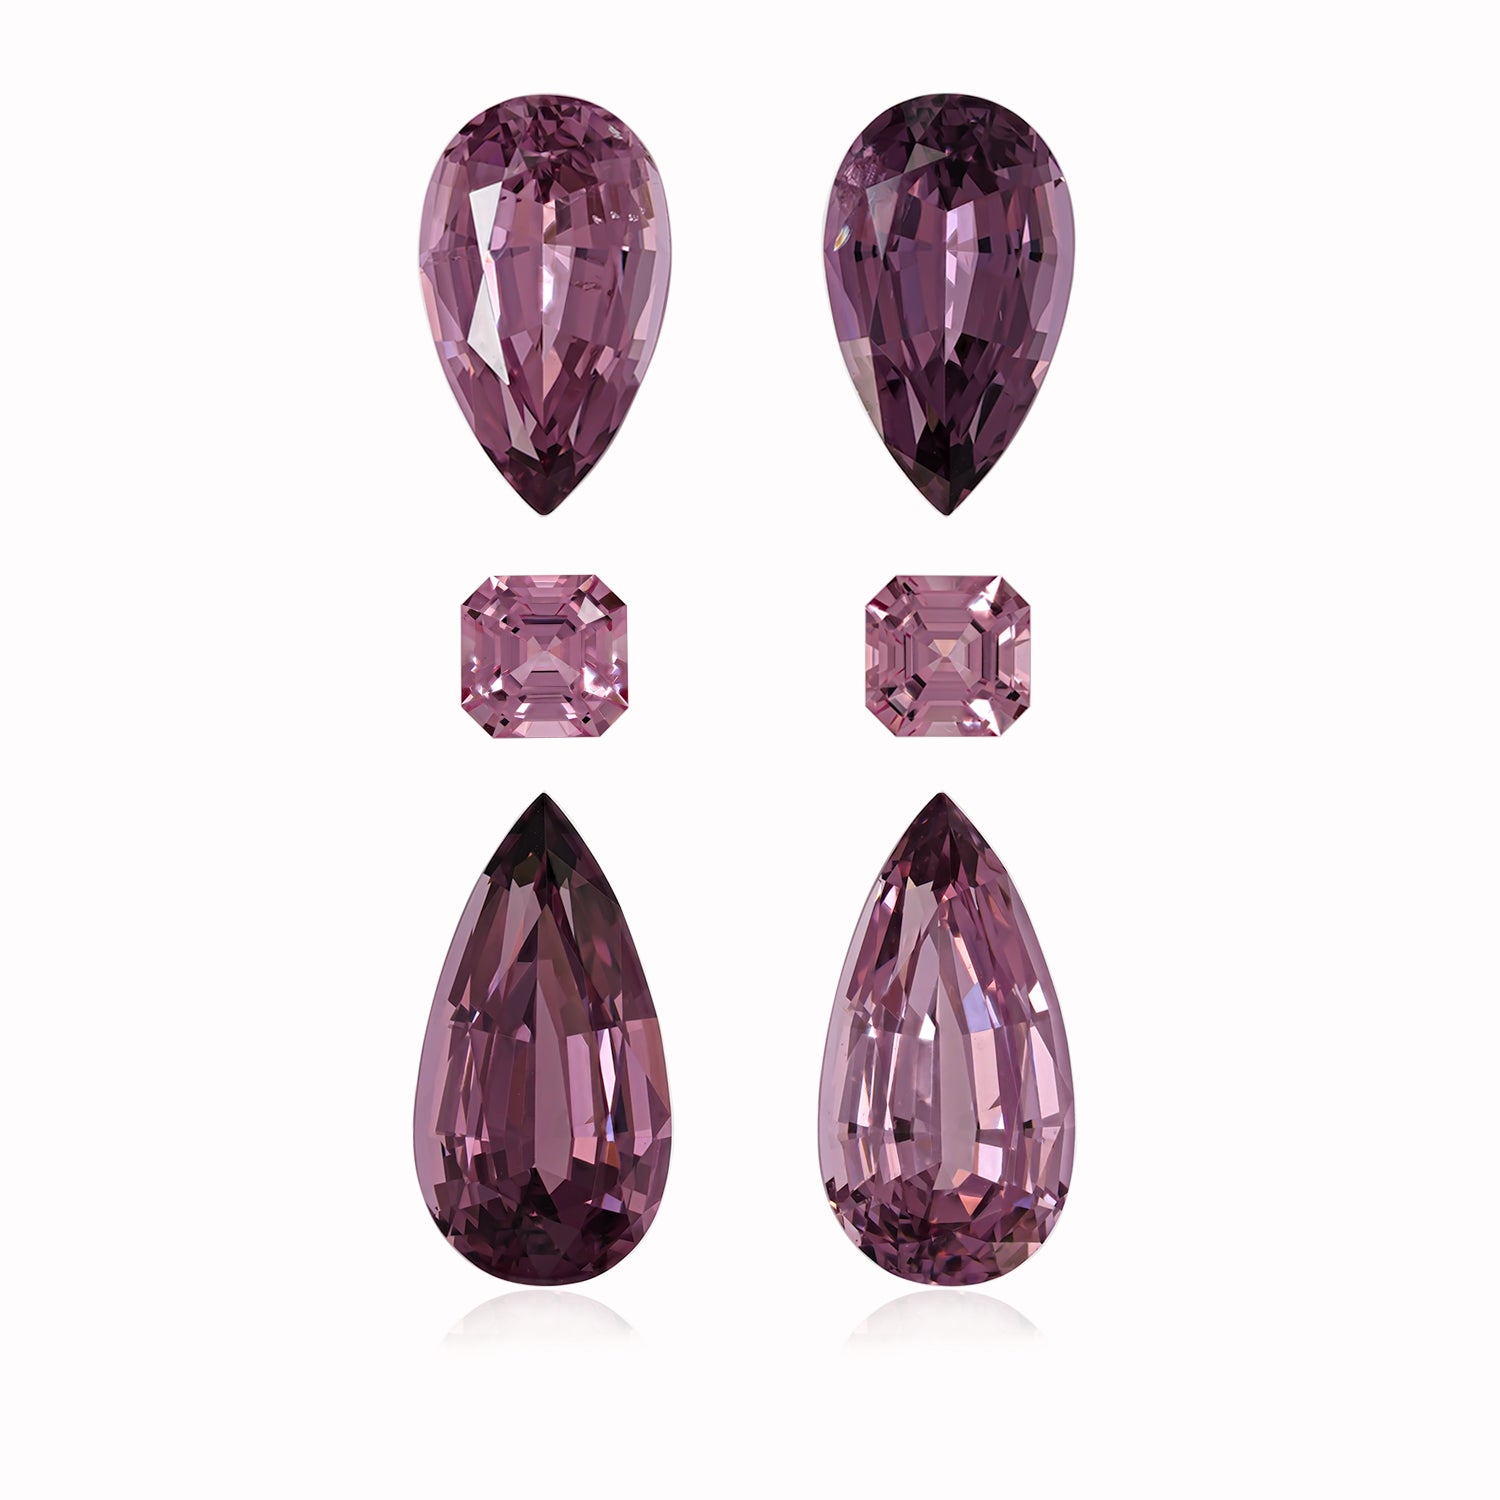 Earring Set Spinel 9.47 CT / 6